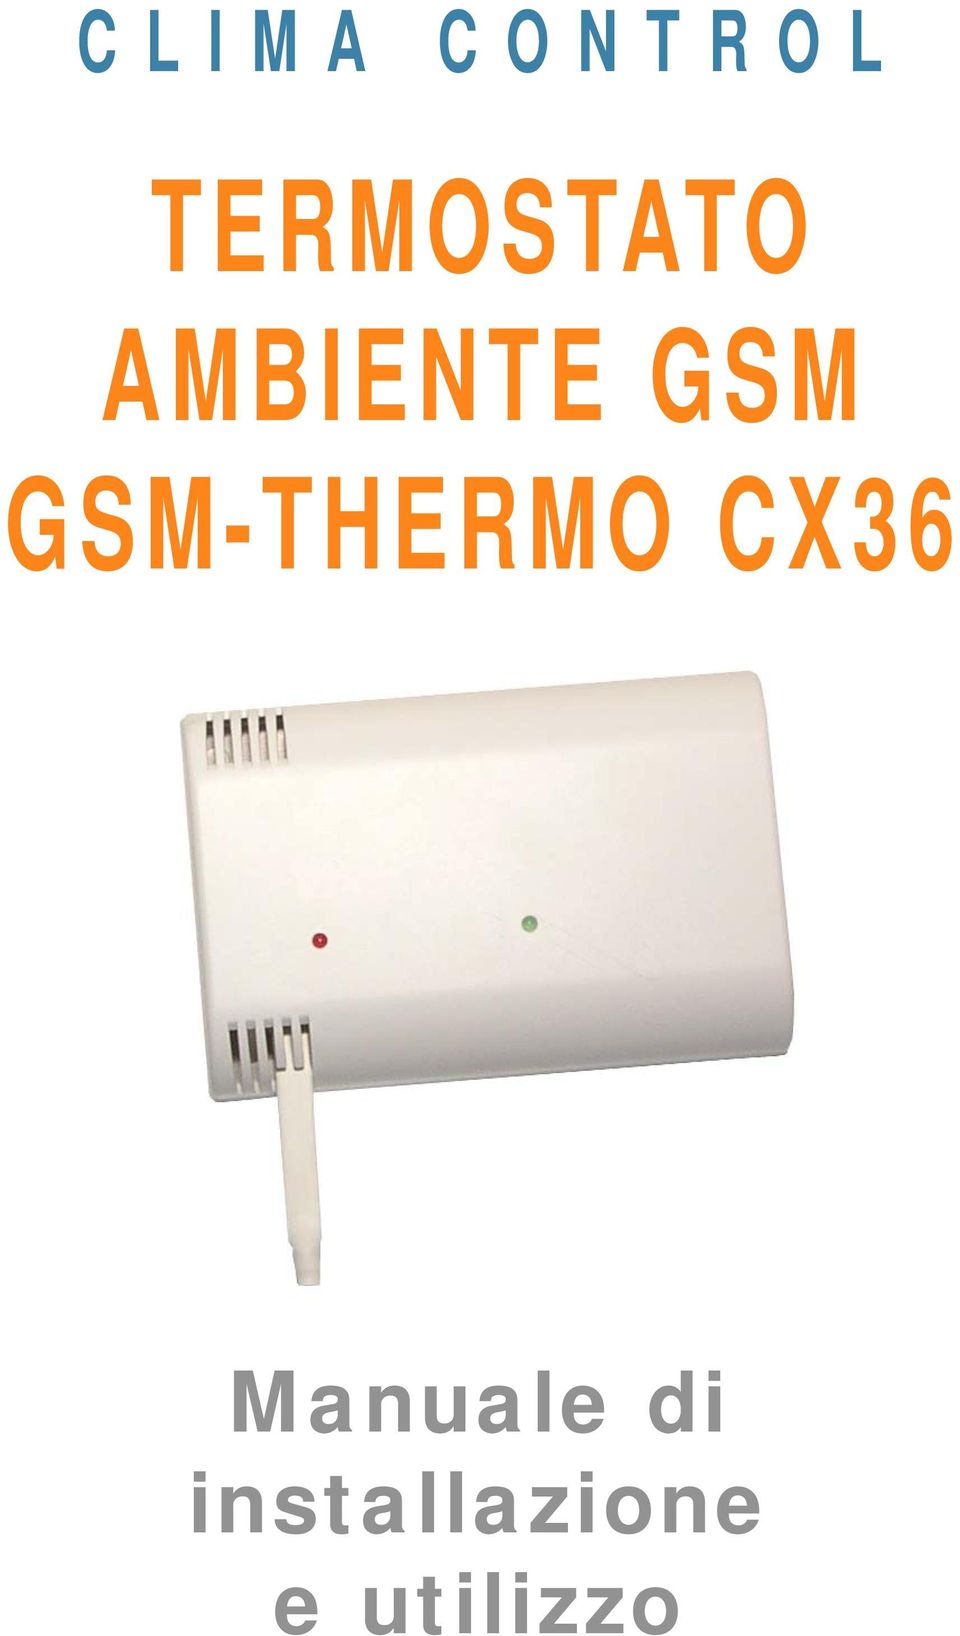 GSM-THERMO CX36 Manuale